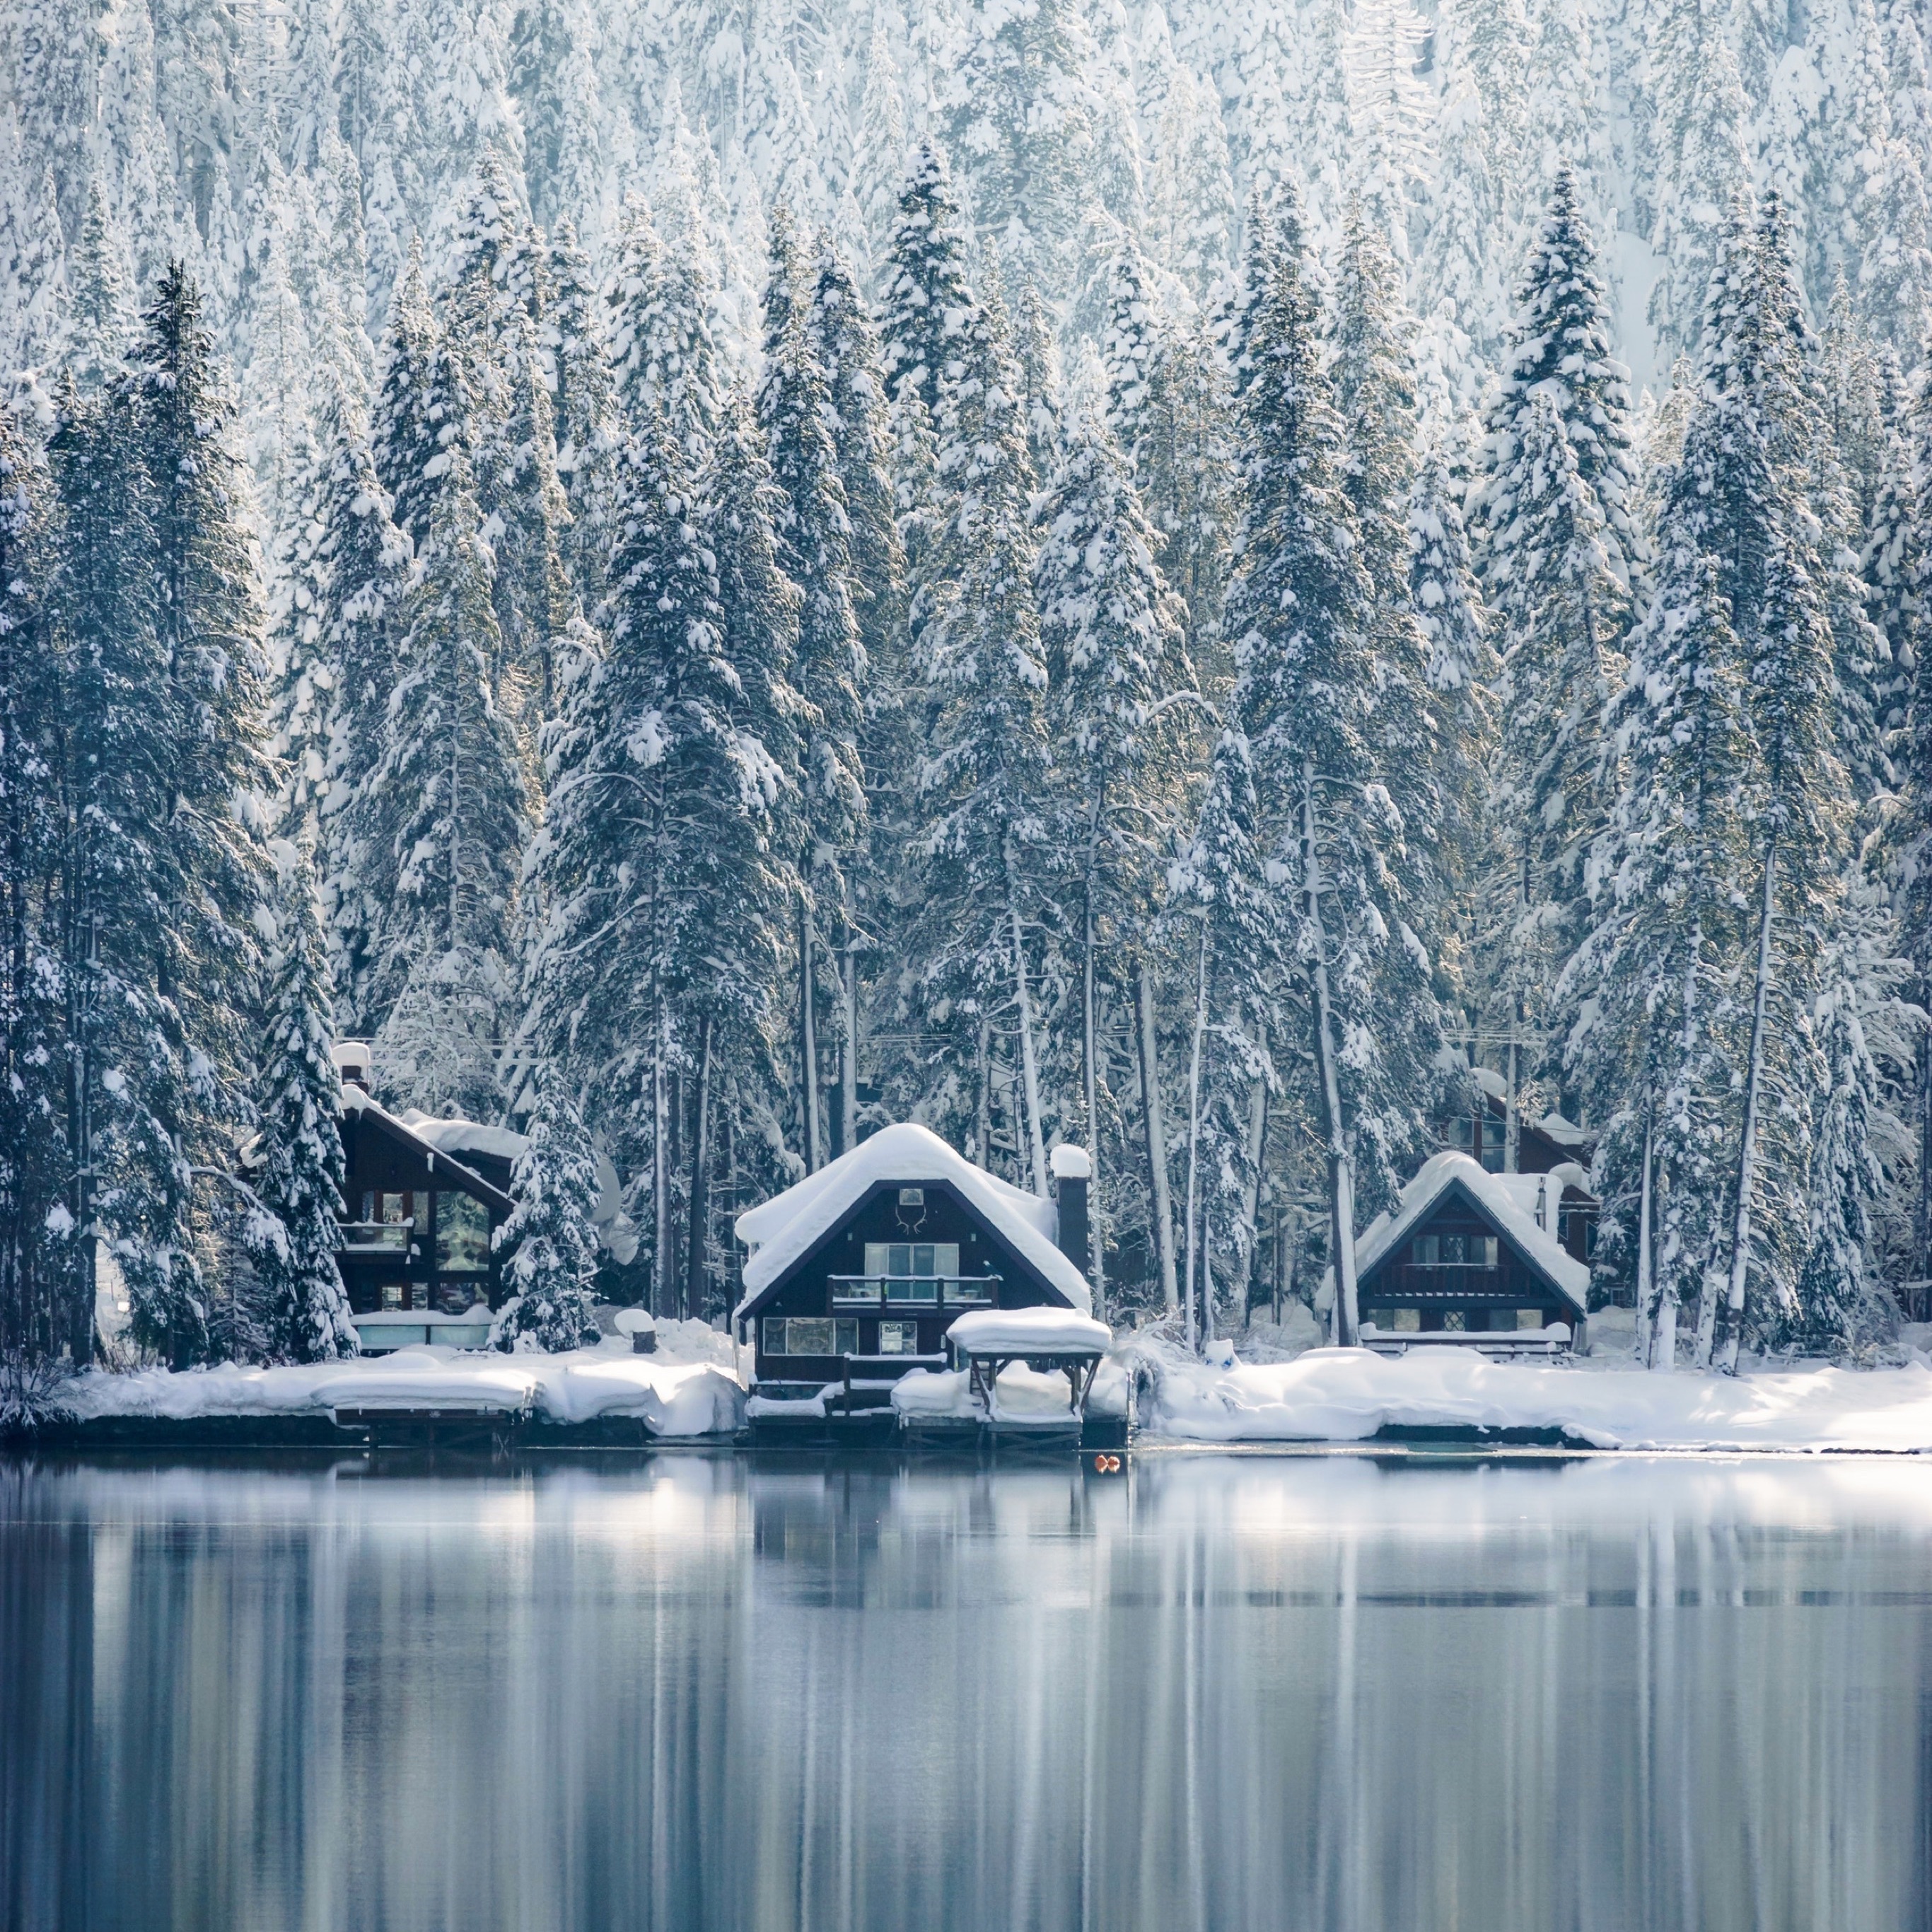 Wallpaper Weekends: Winter Wonderland Wallpapers for iPhone and iPad